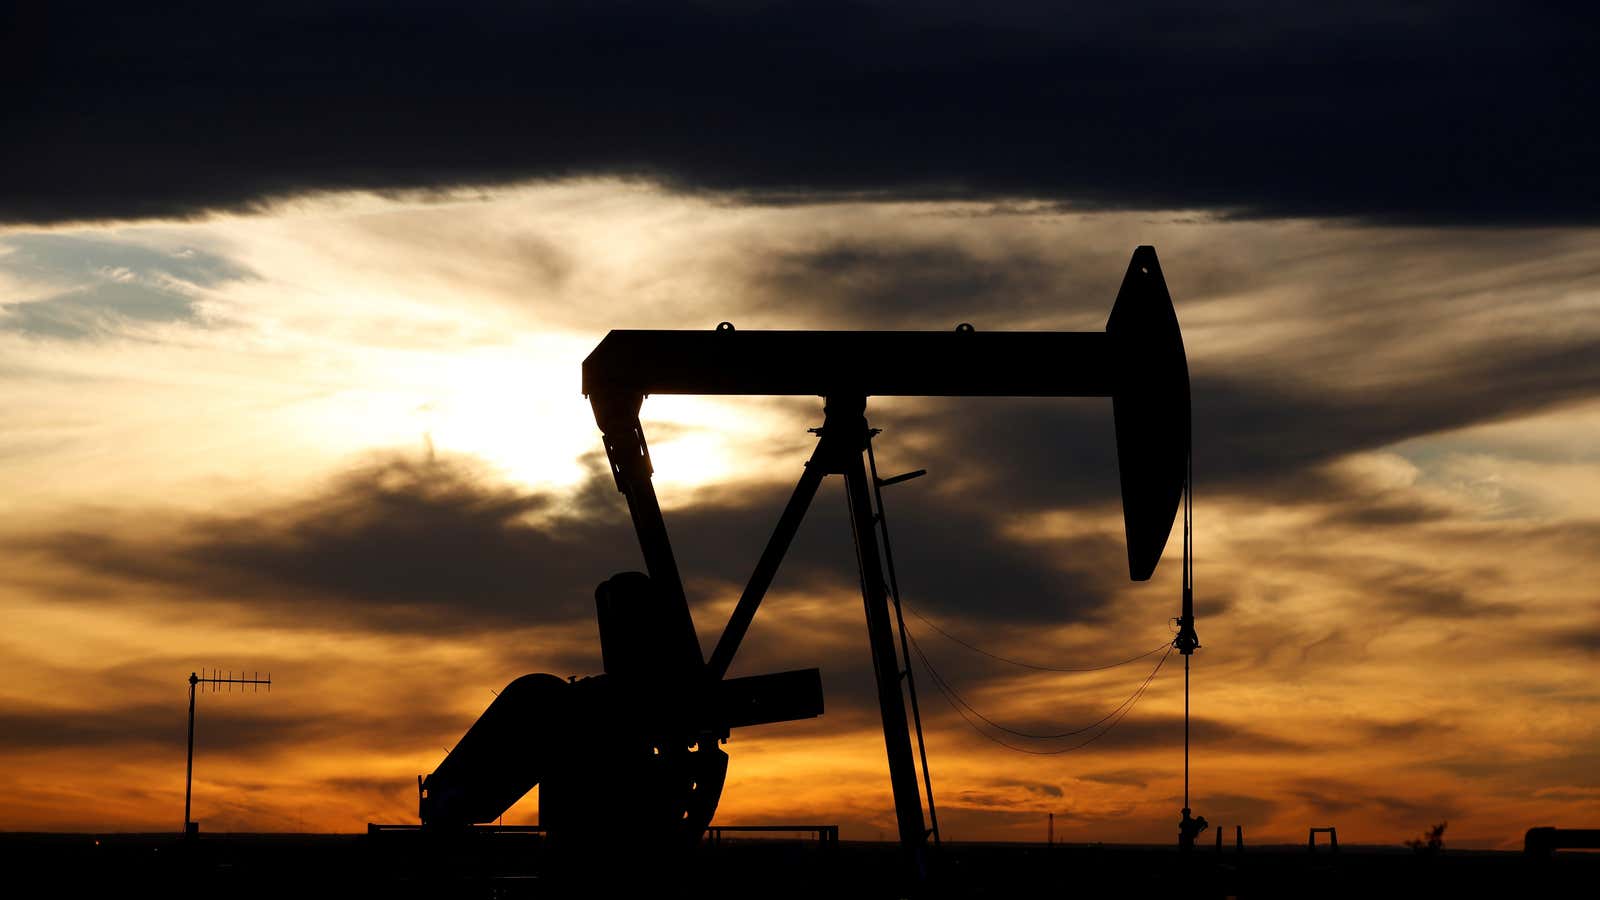 In 2022, Exxon and Chevron plan to increase oil drilling in the Permian basin in Texas.